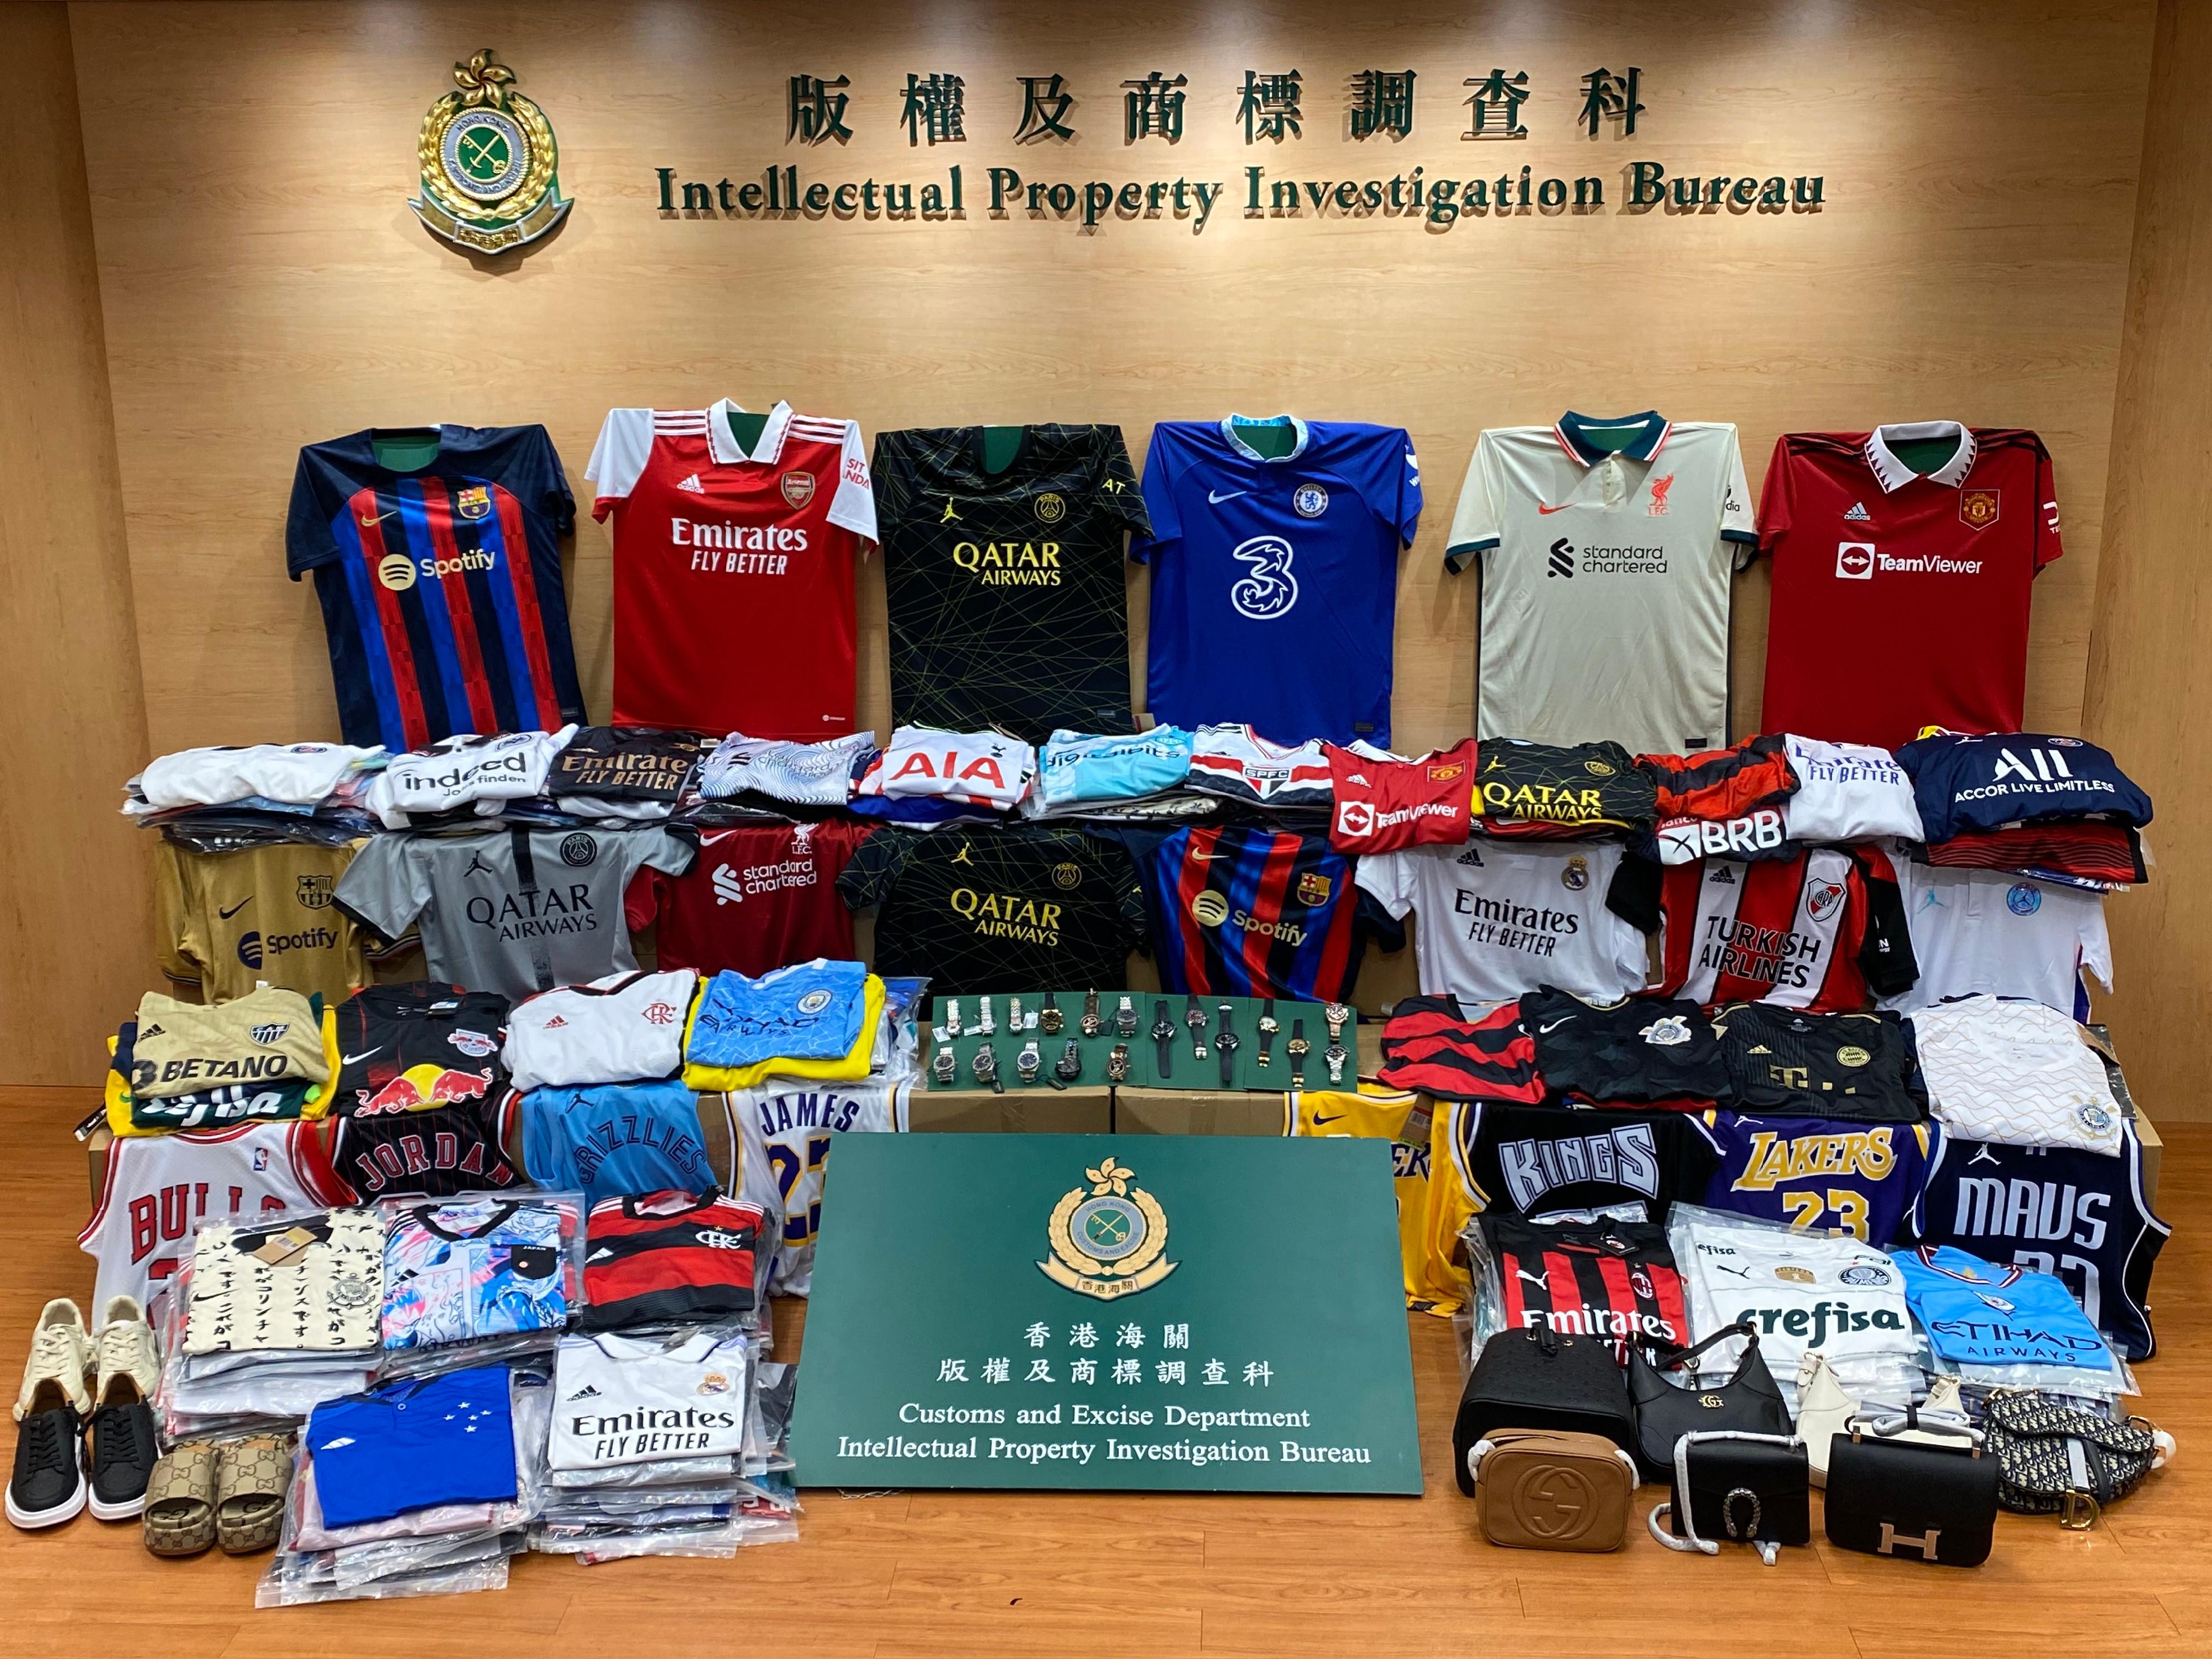 Hong Kong Customs conducted a series of operations to combat different kinds of local and cross-boundary counterfeit goods activities from February 14 to 16. During the operations, Customs seized more than 11 000 items of suspected counterfeit goods with a total estimated market value of about $4.4 million at the Shenzhen Bay Control Point and in Yuen Long. Photo shows some of the suspected counterfeit goods seized.